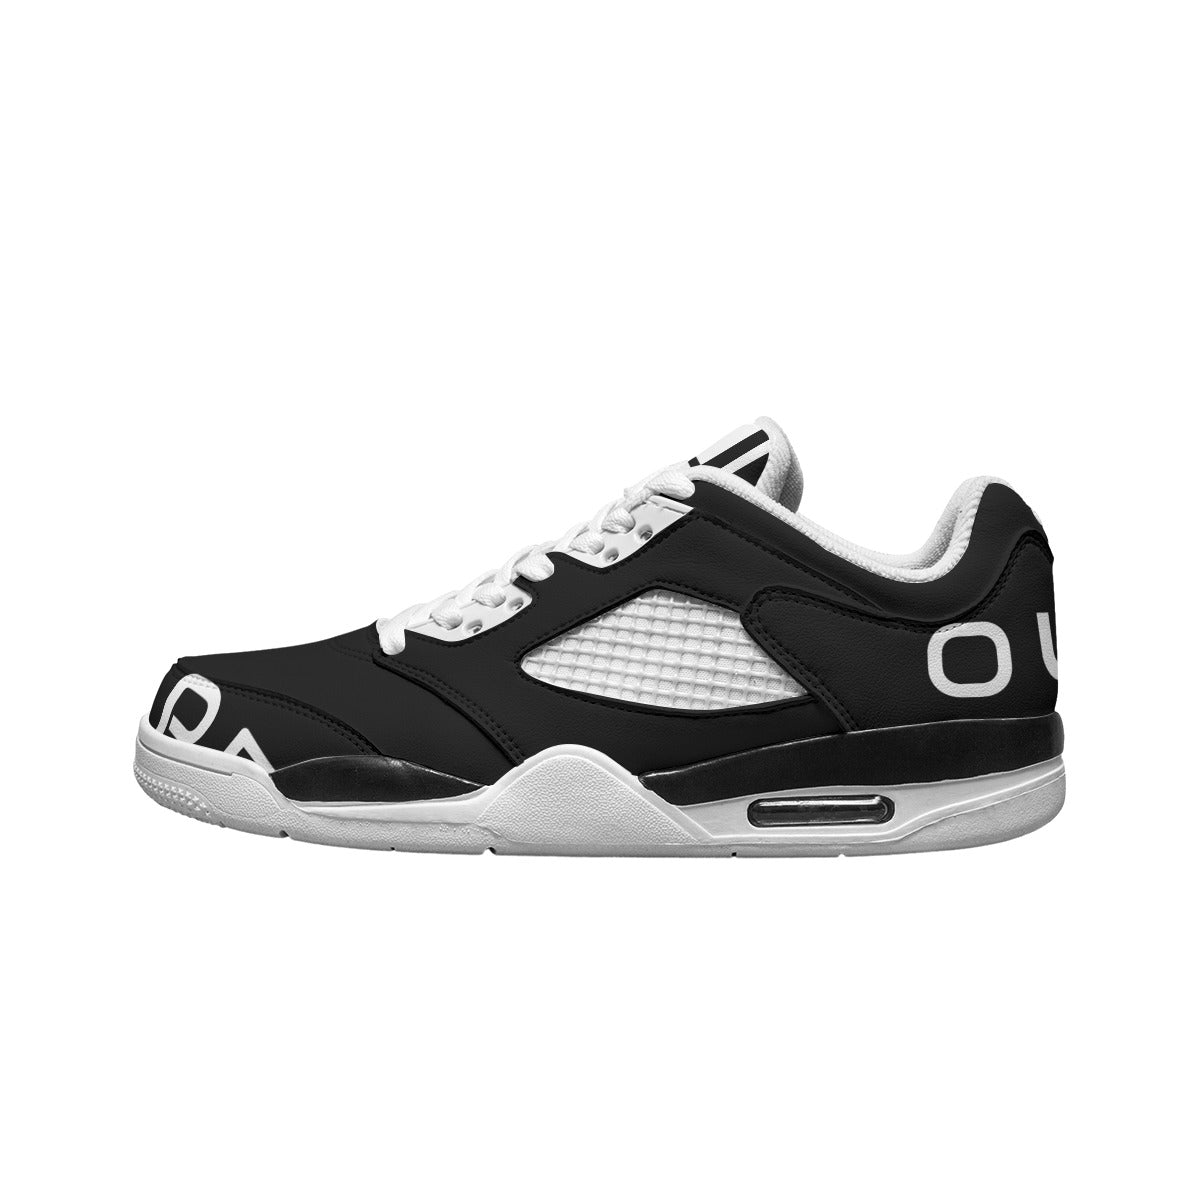 OUPE Men's Cushioned Anti-collision Basketball Shoes